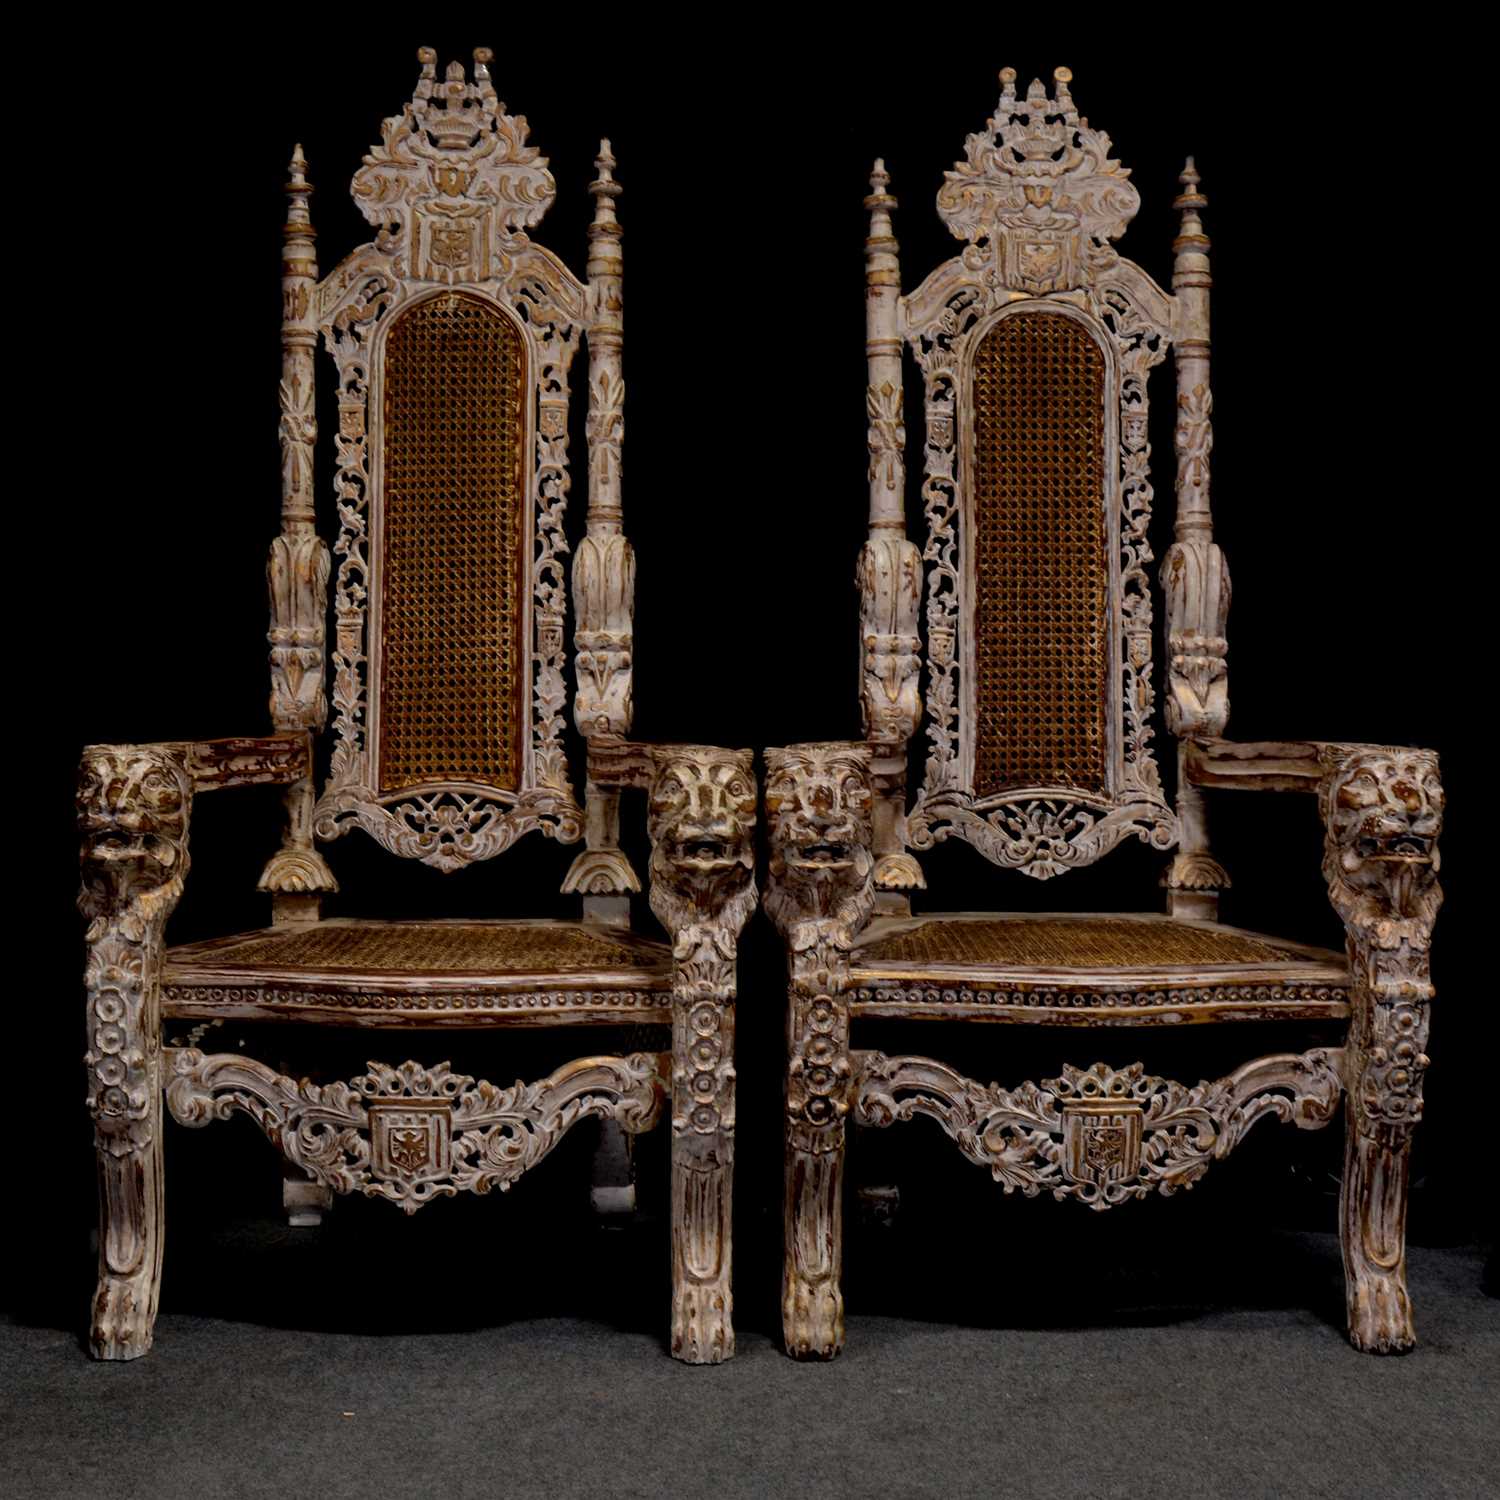 Lot 14 - Pair of Asian painted and gilt hardwood chairs